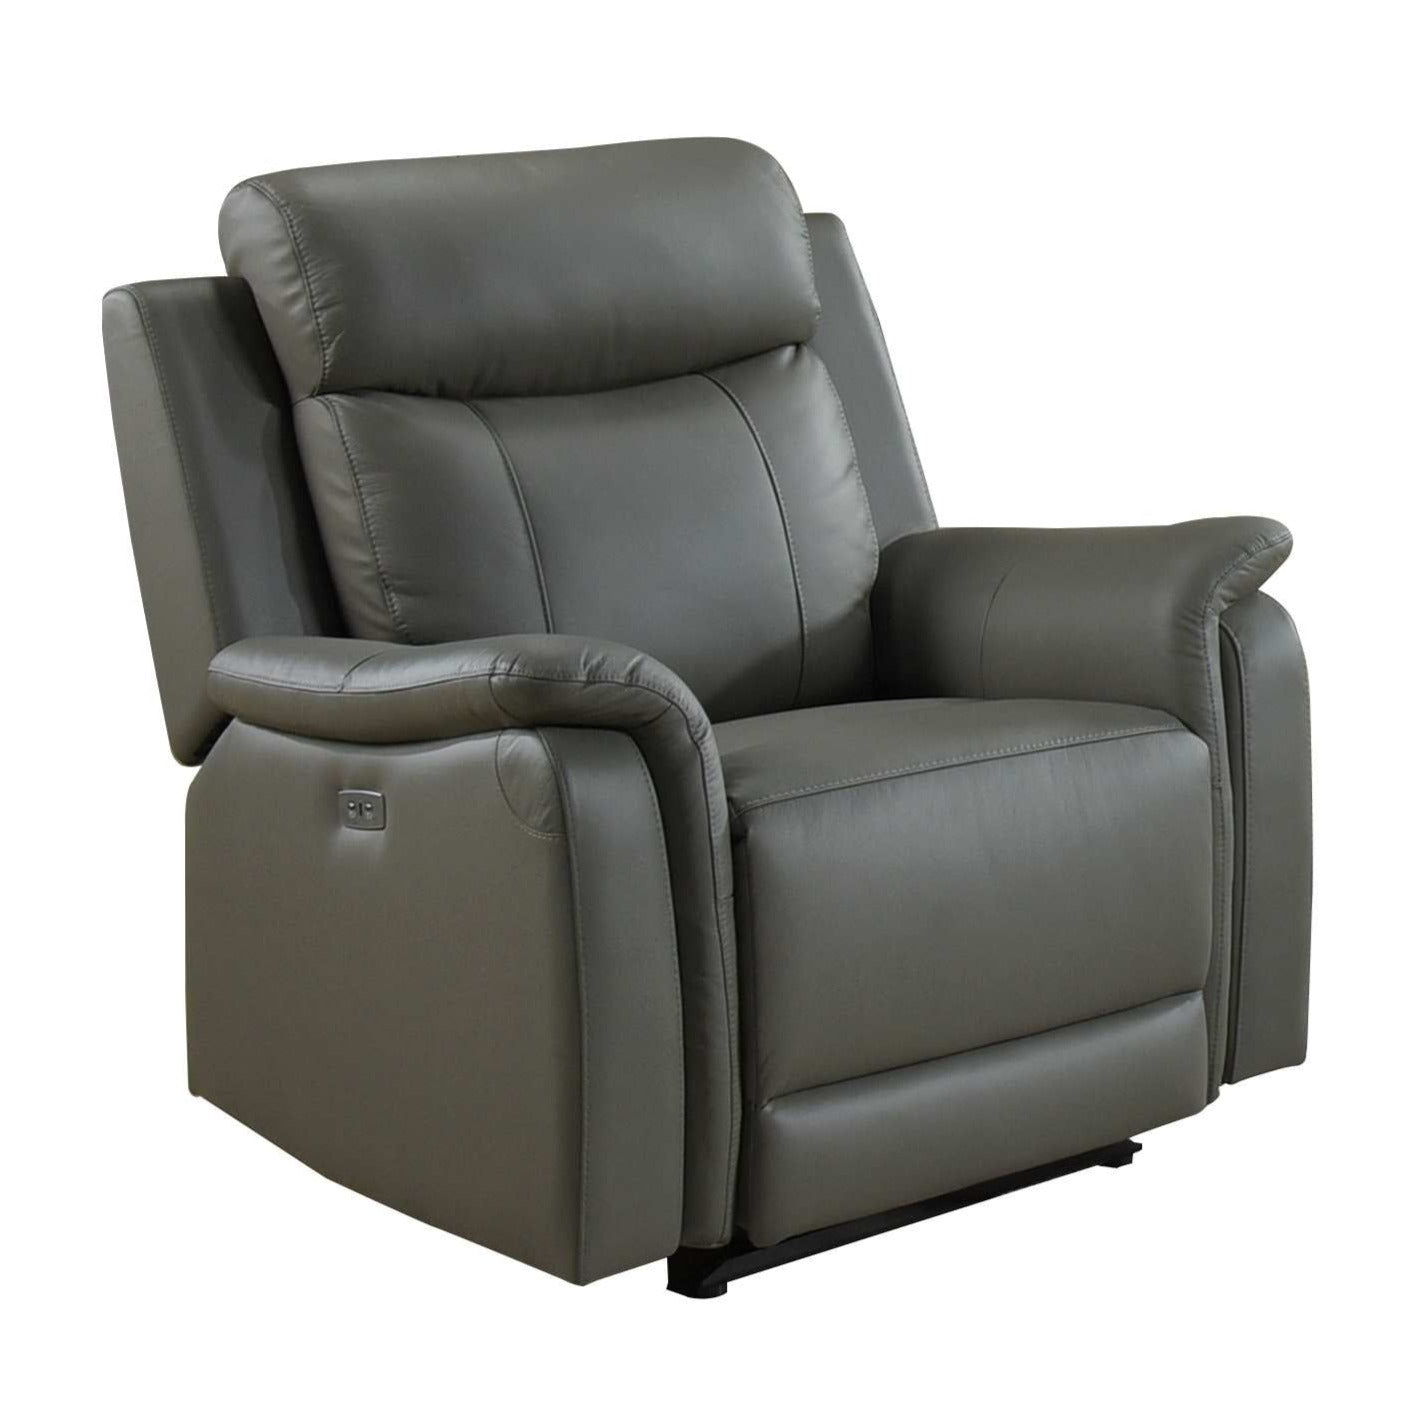 Cyrus Top Grain Leather Power Reclining Chair Grey 99840